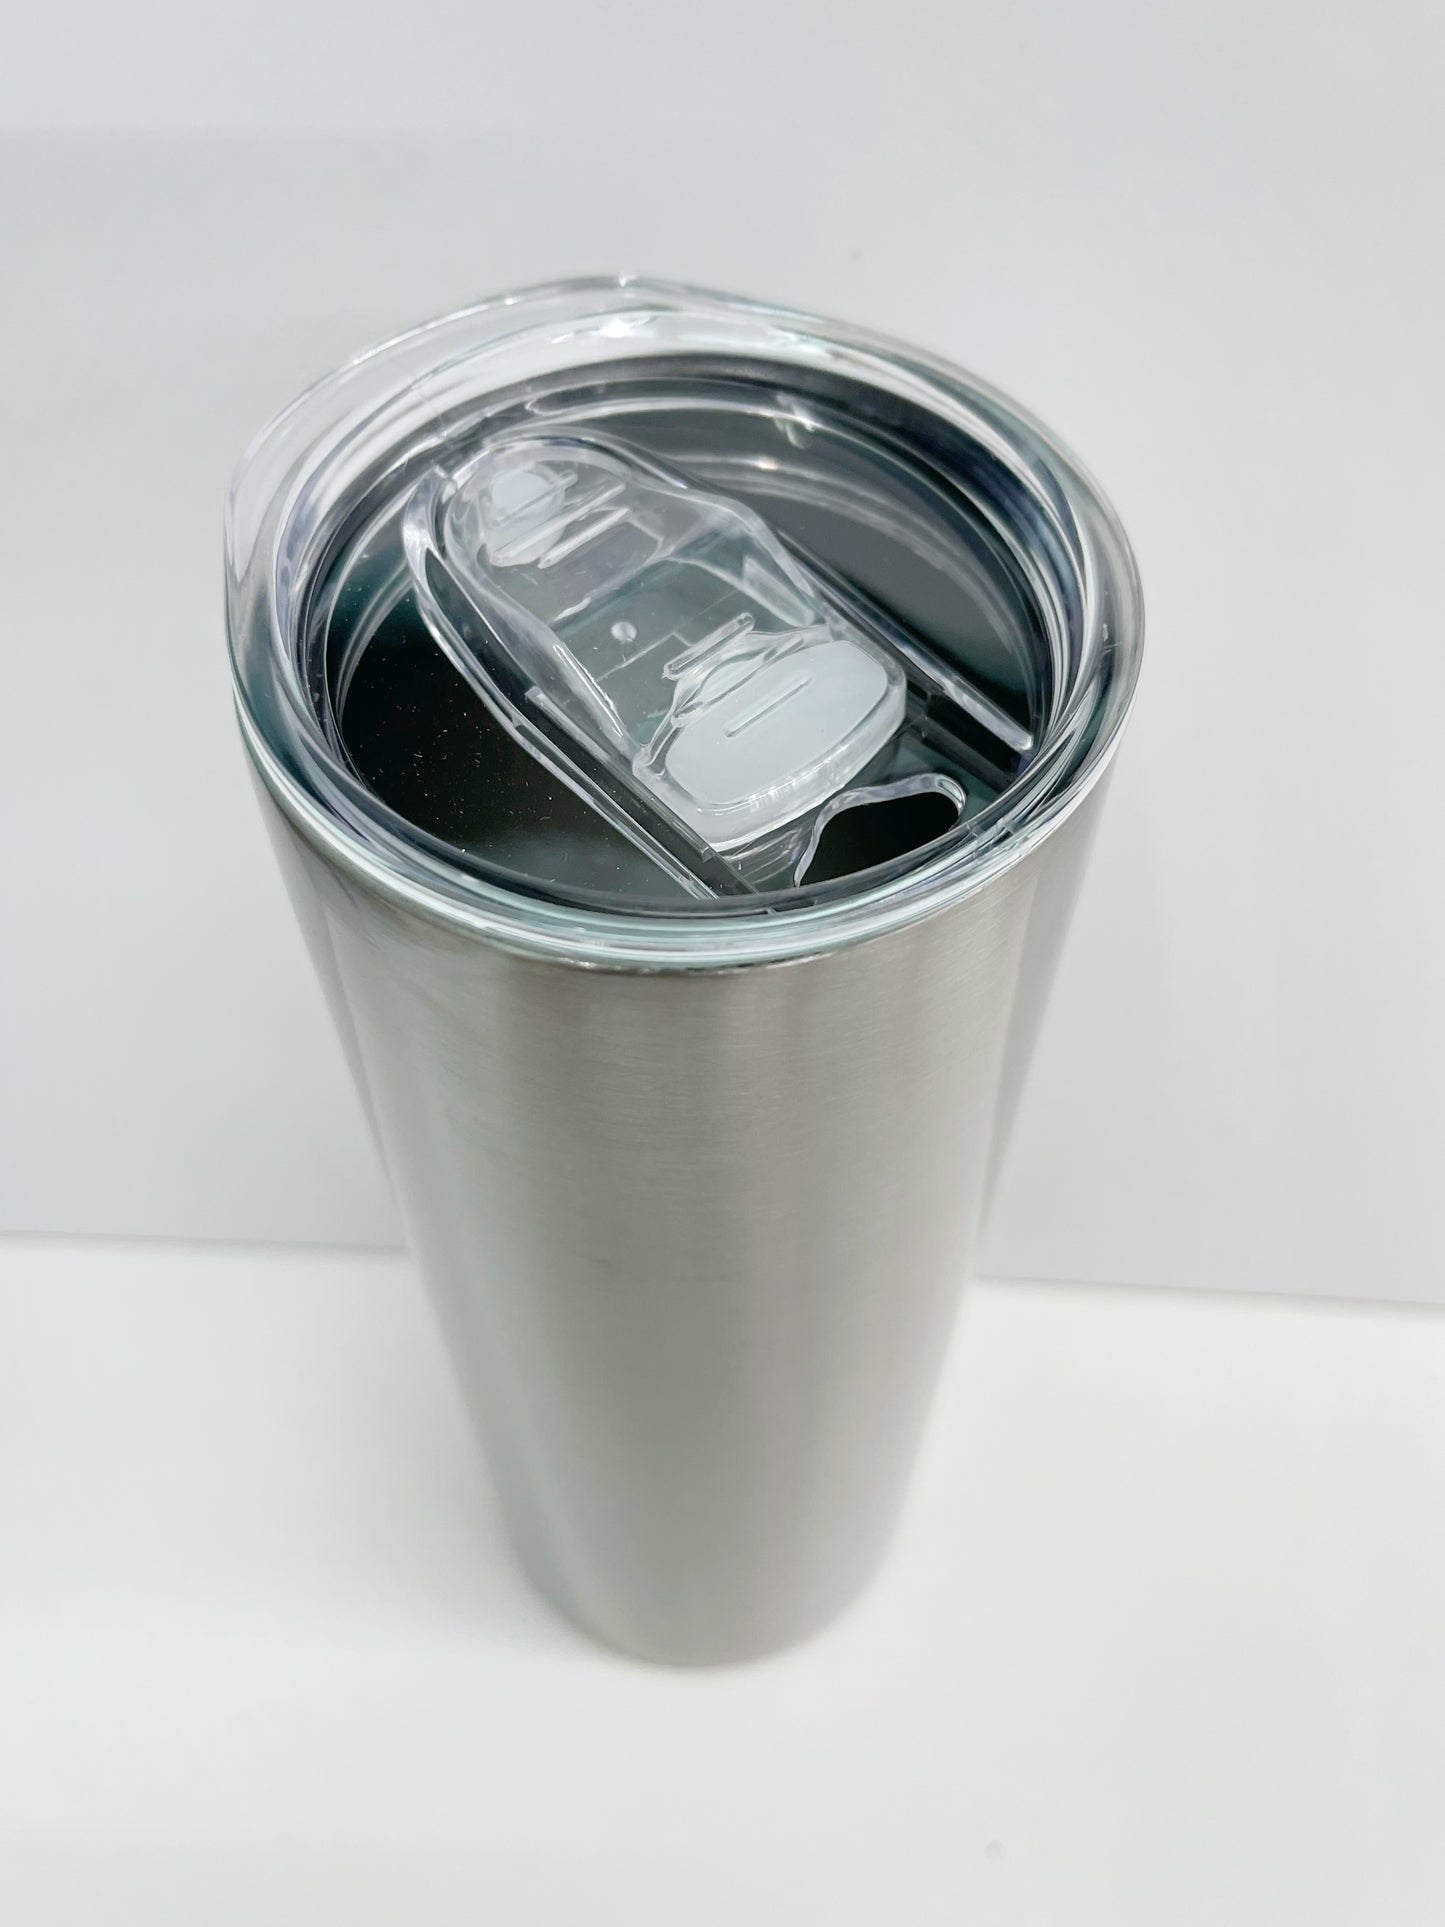 20 oz Stainless Finish Skinny Straight Tumblers